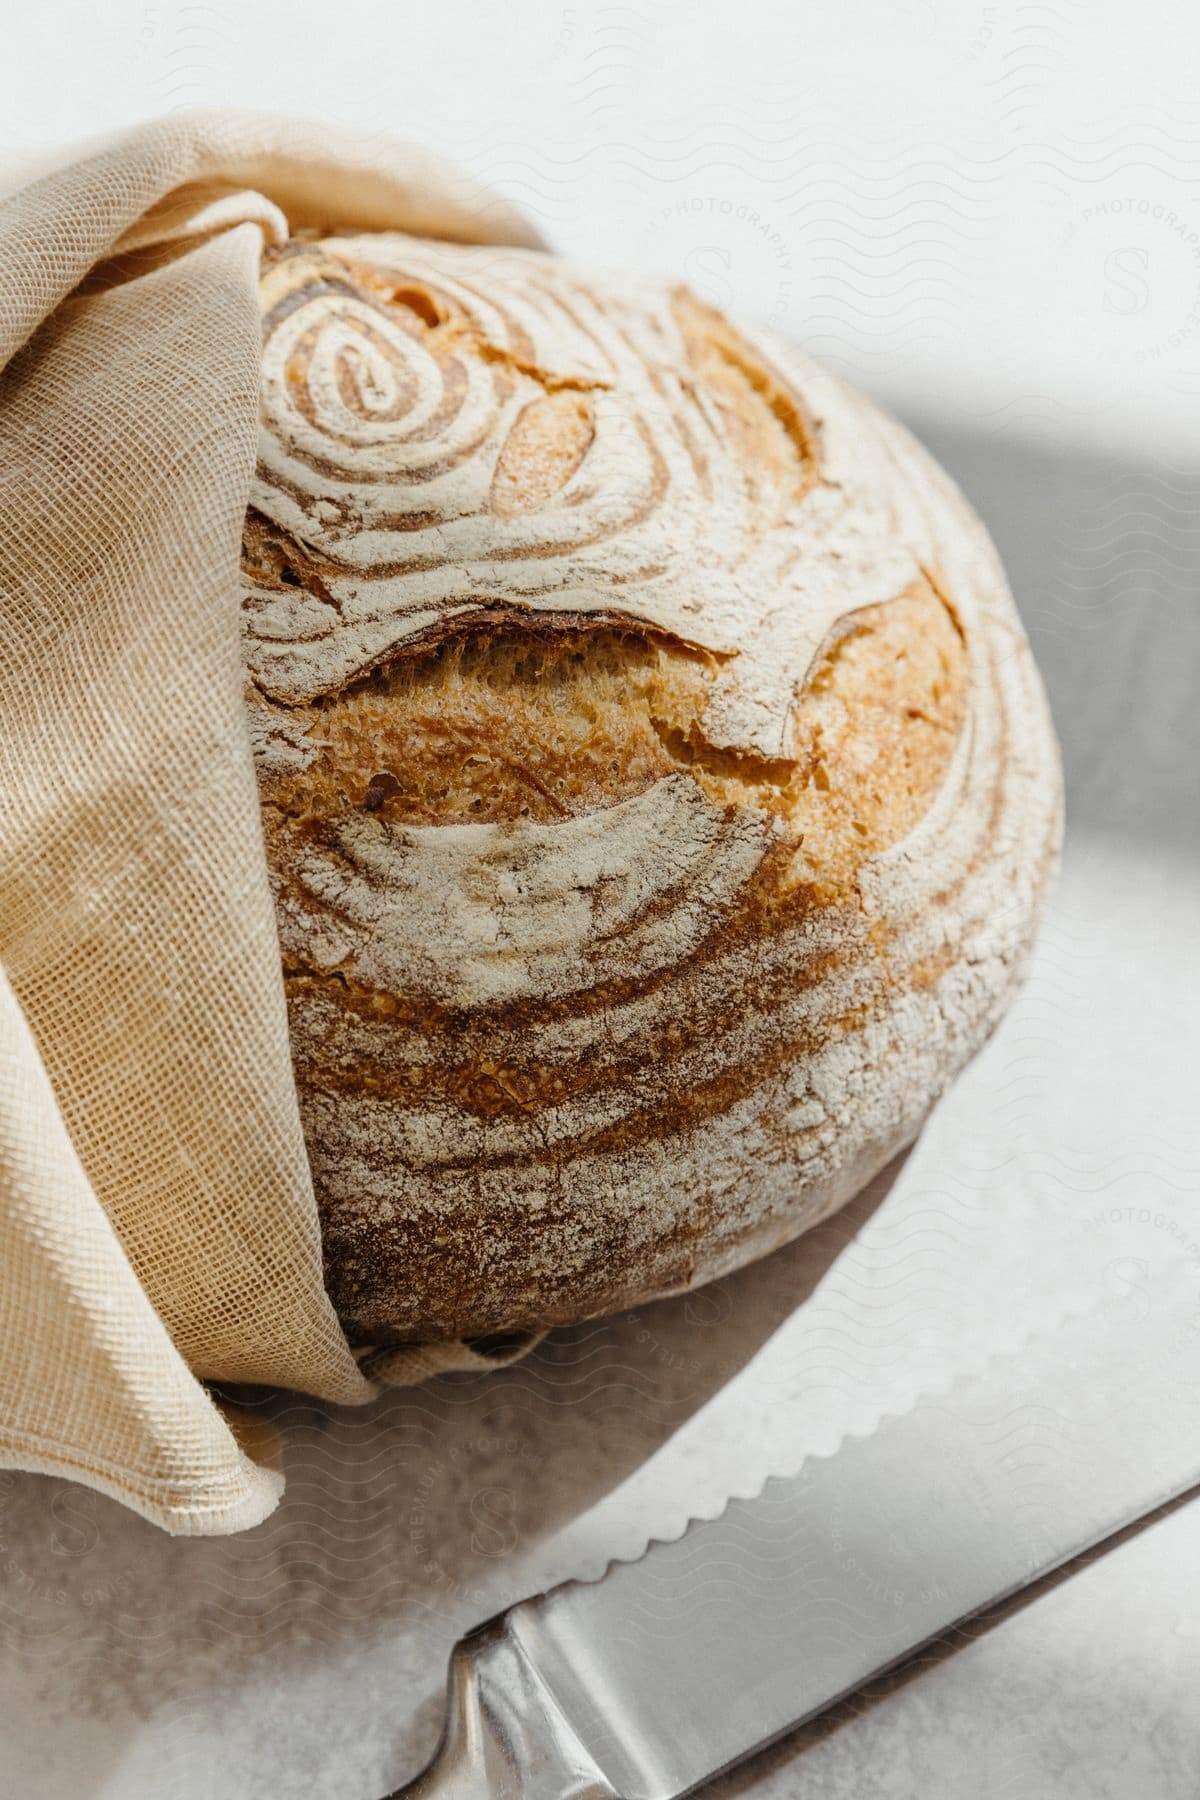 Stock photo of a homemade bread wrapped in a cloth and a knife